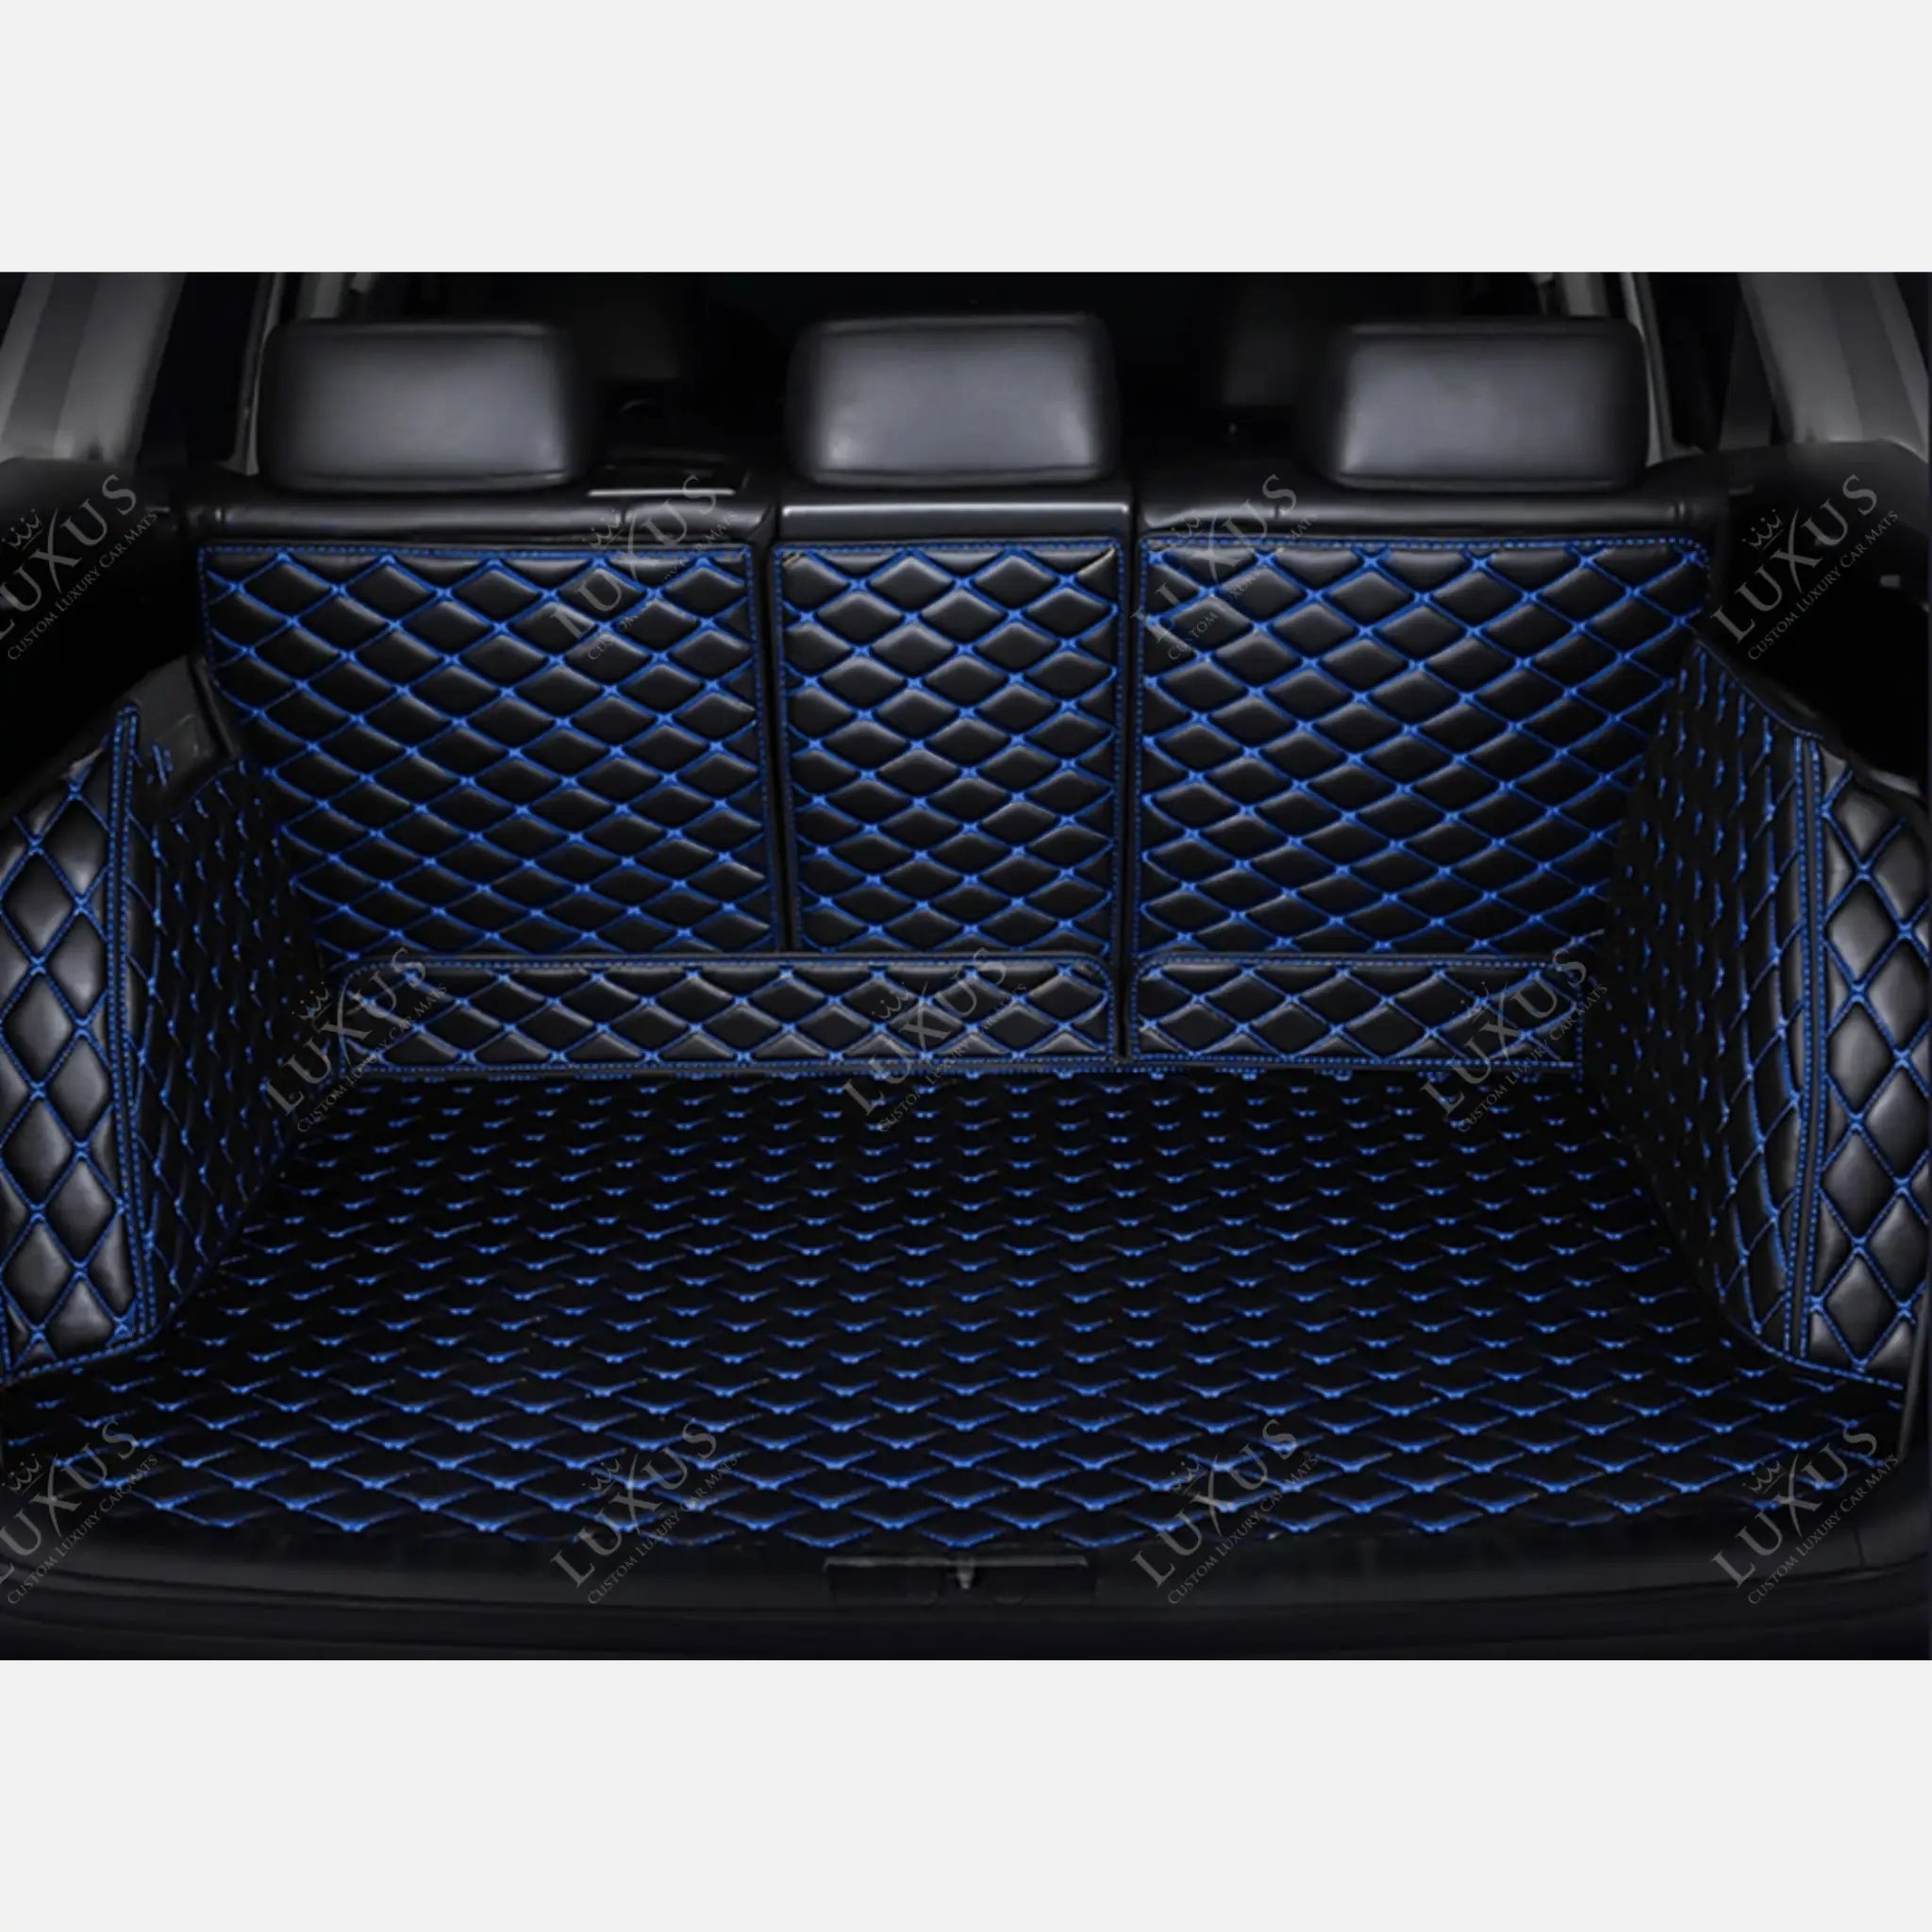 Trunk Mats For Car, Truck & SUV Luxus Car Mats Custom All-Weather  Waterproof Diamond Auto Boot Liner Carpets Rugs Black & Blue Stitching